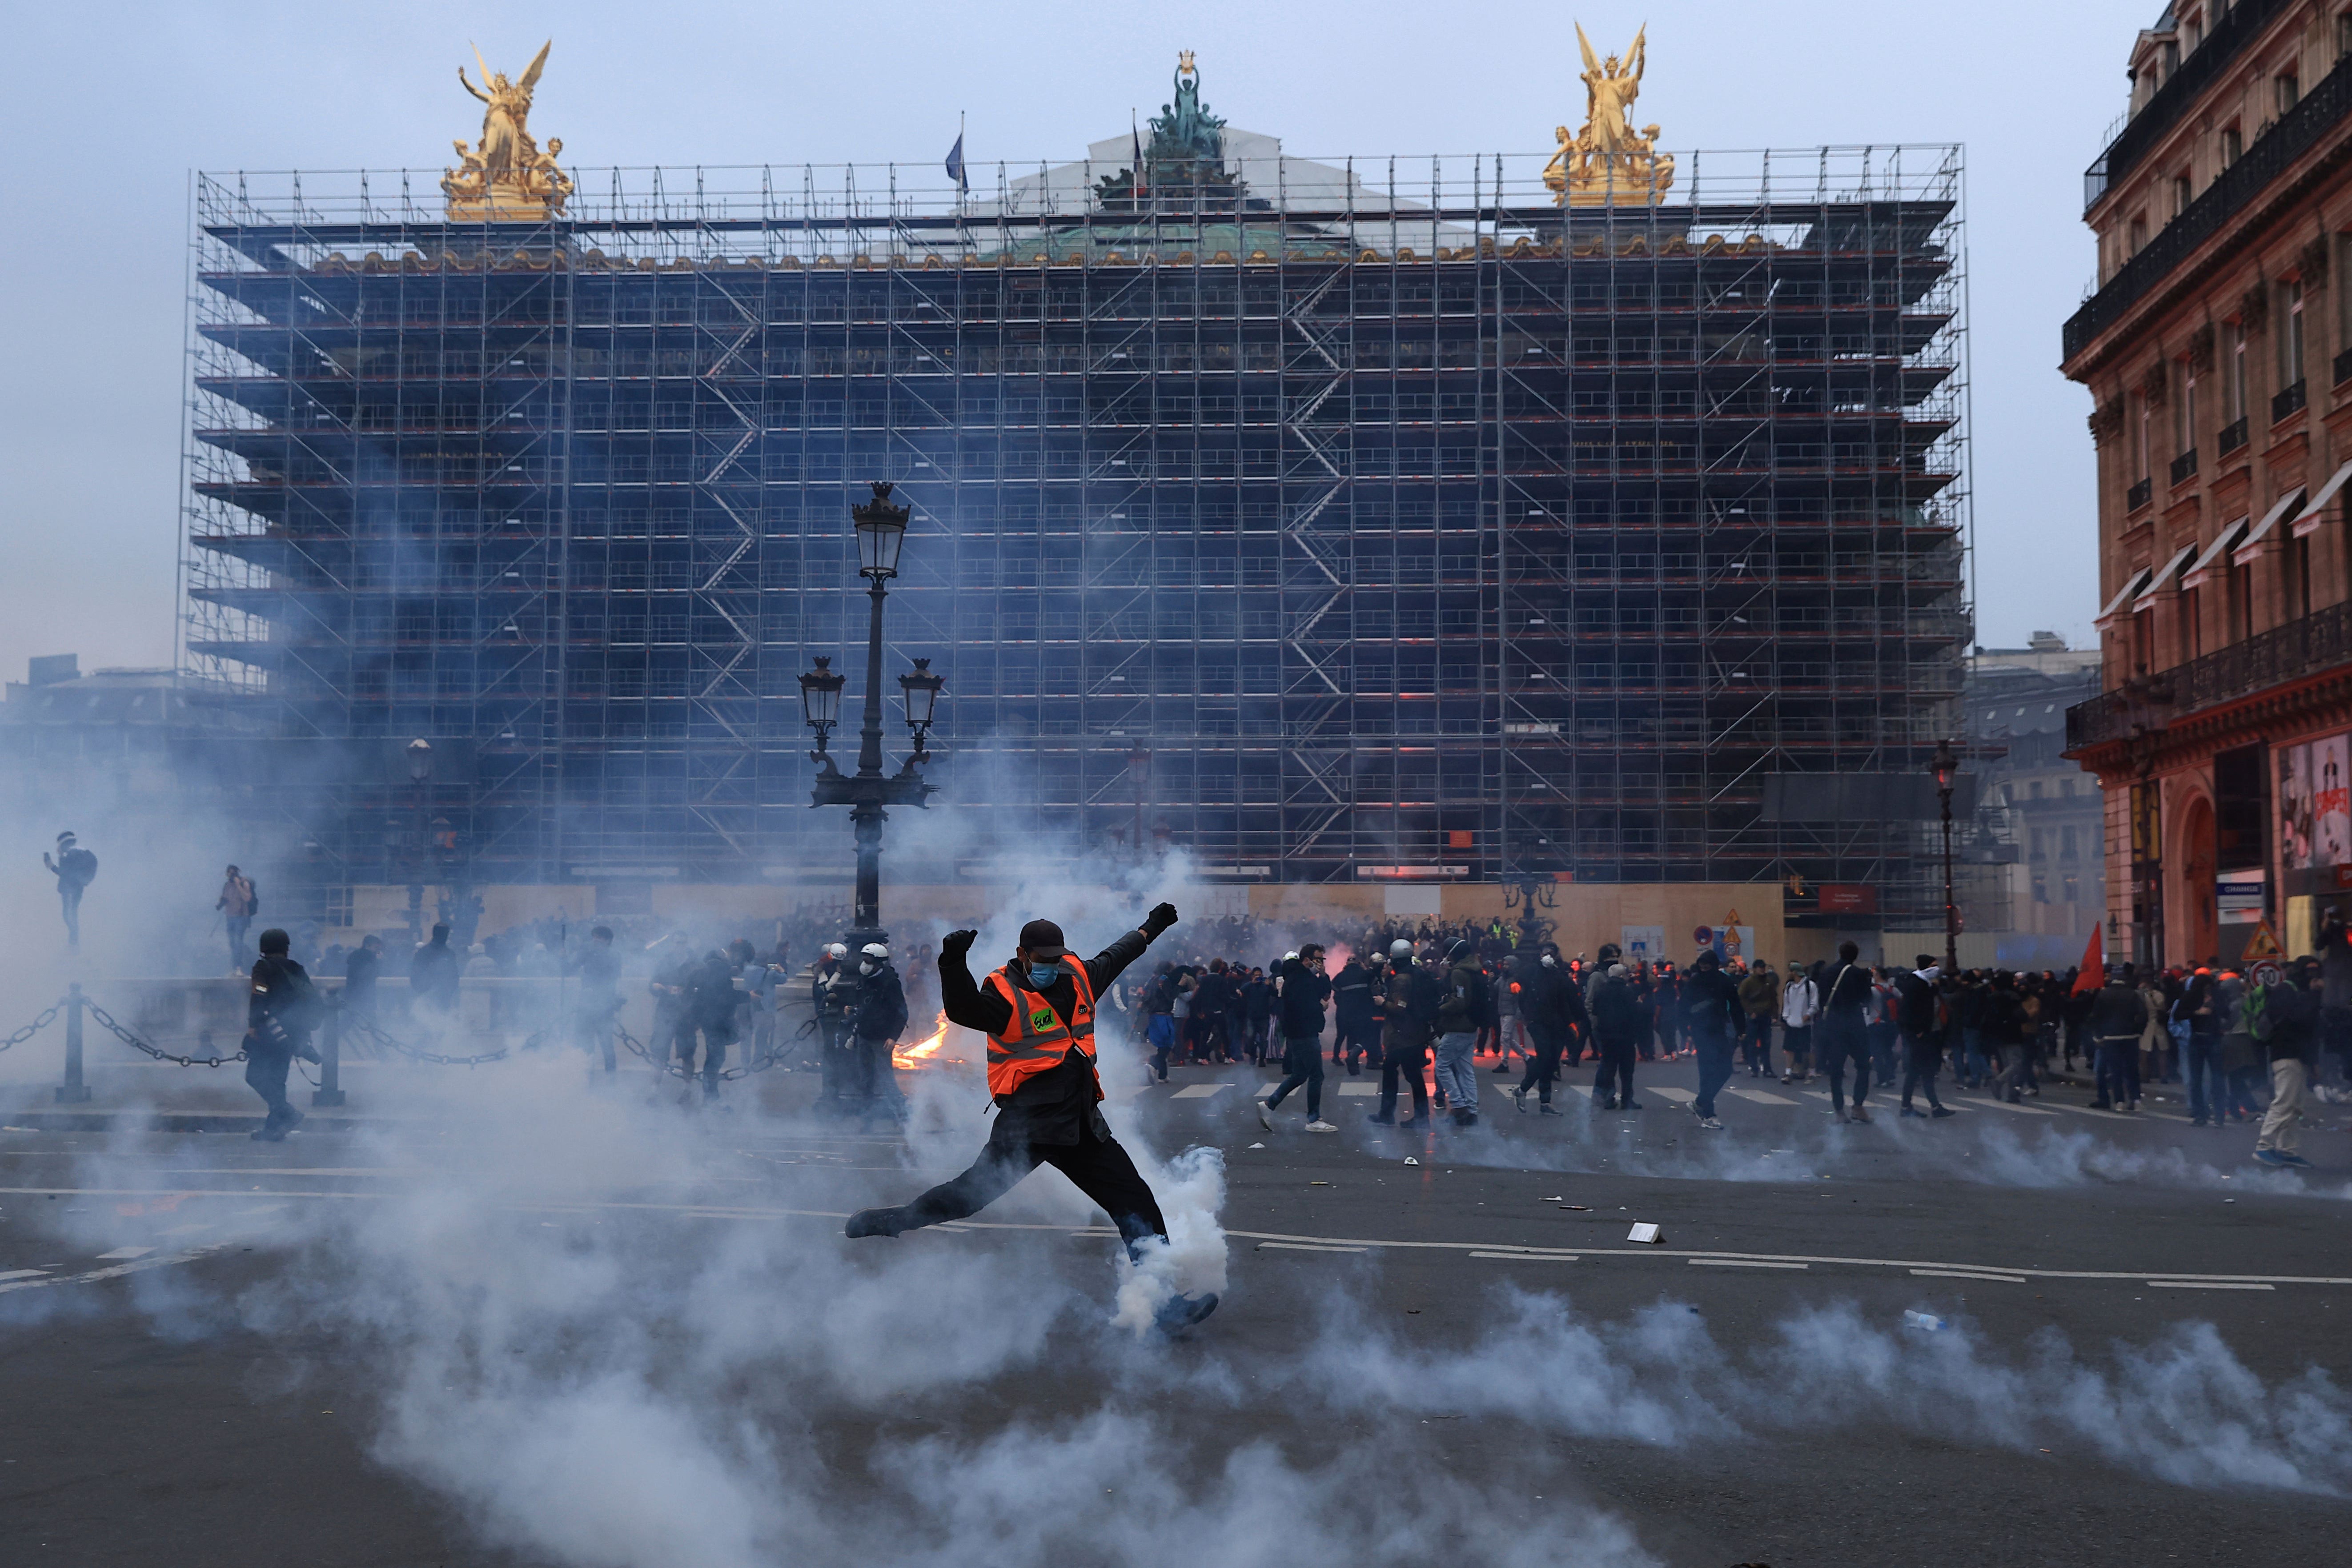 Protests at pension reforms have sparked ugly scenes in France